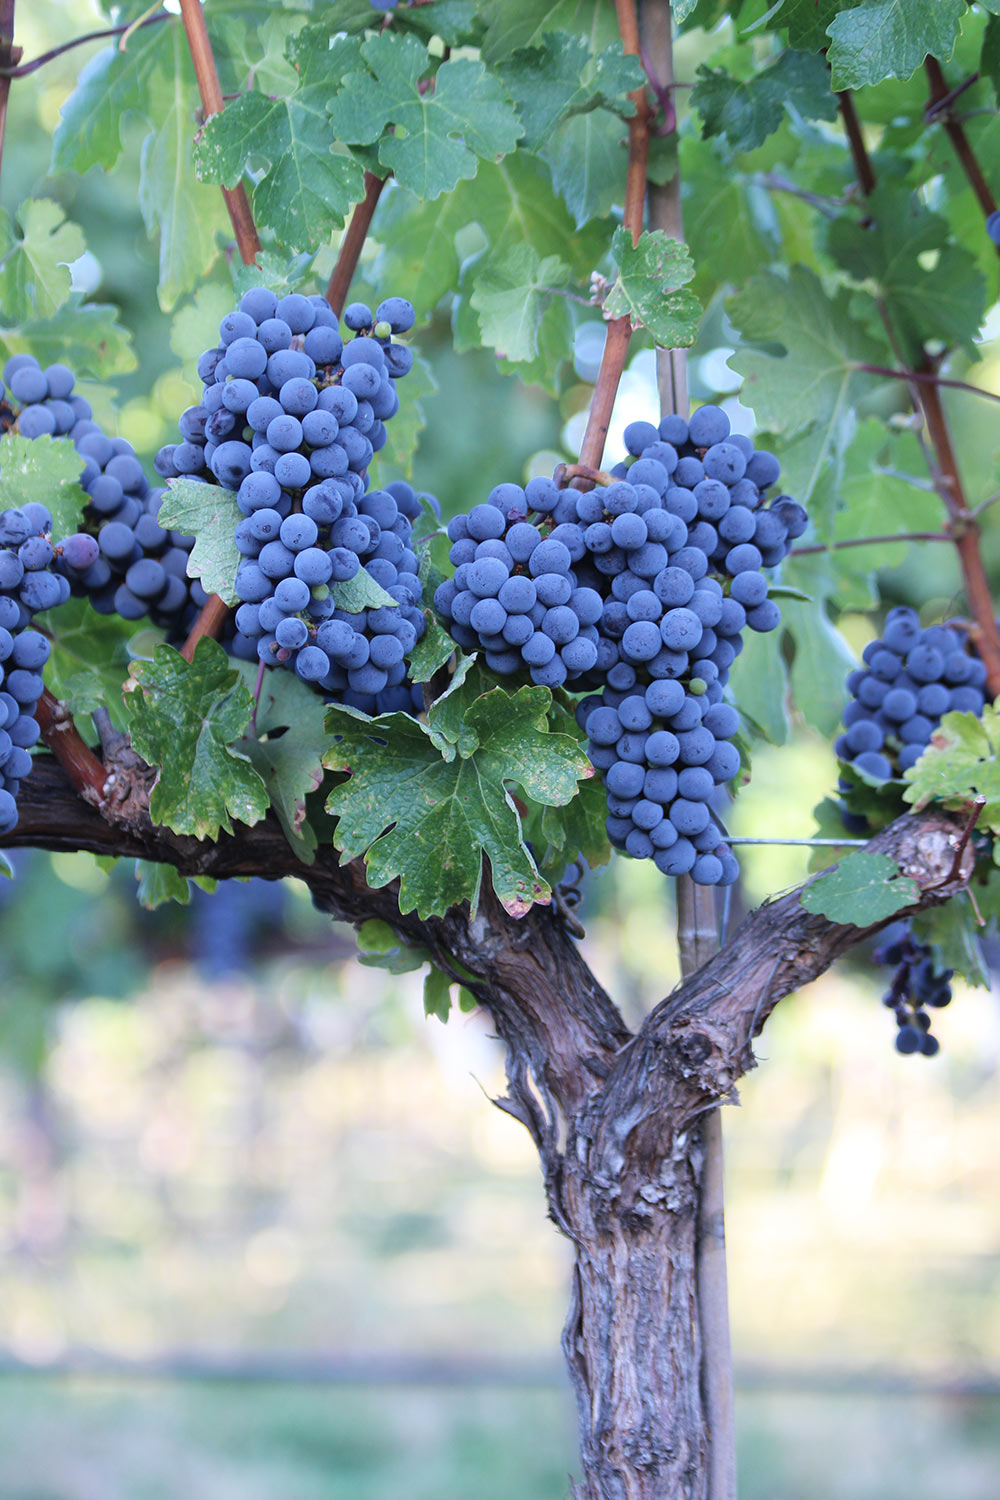 Grape clusters on the vine